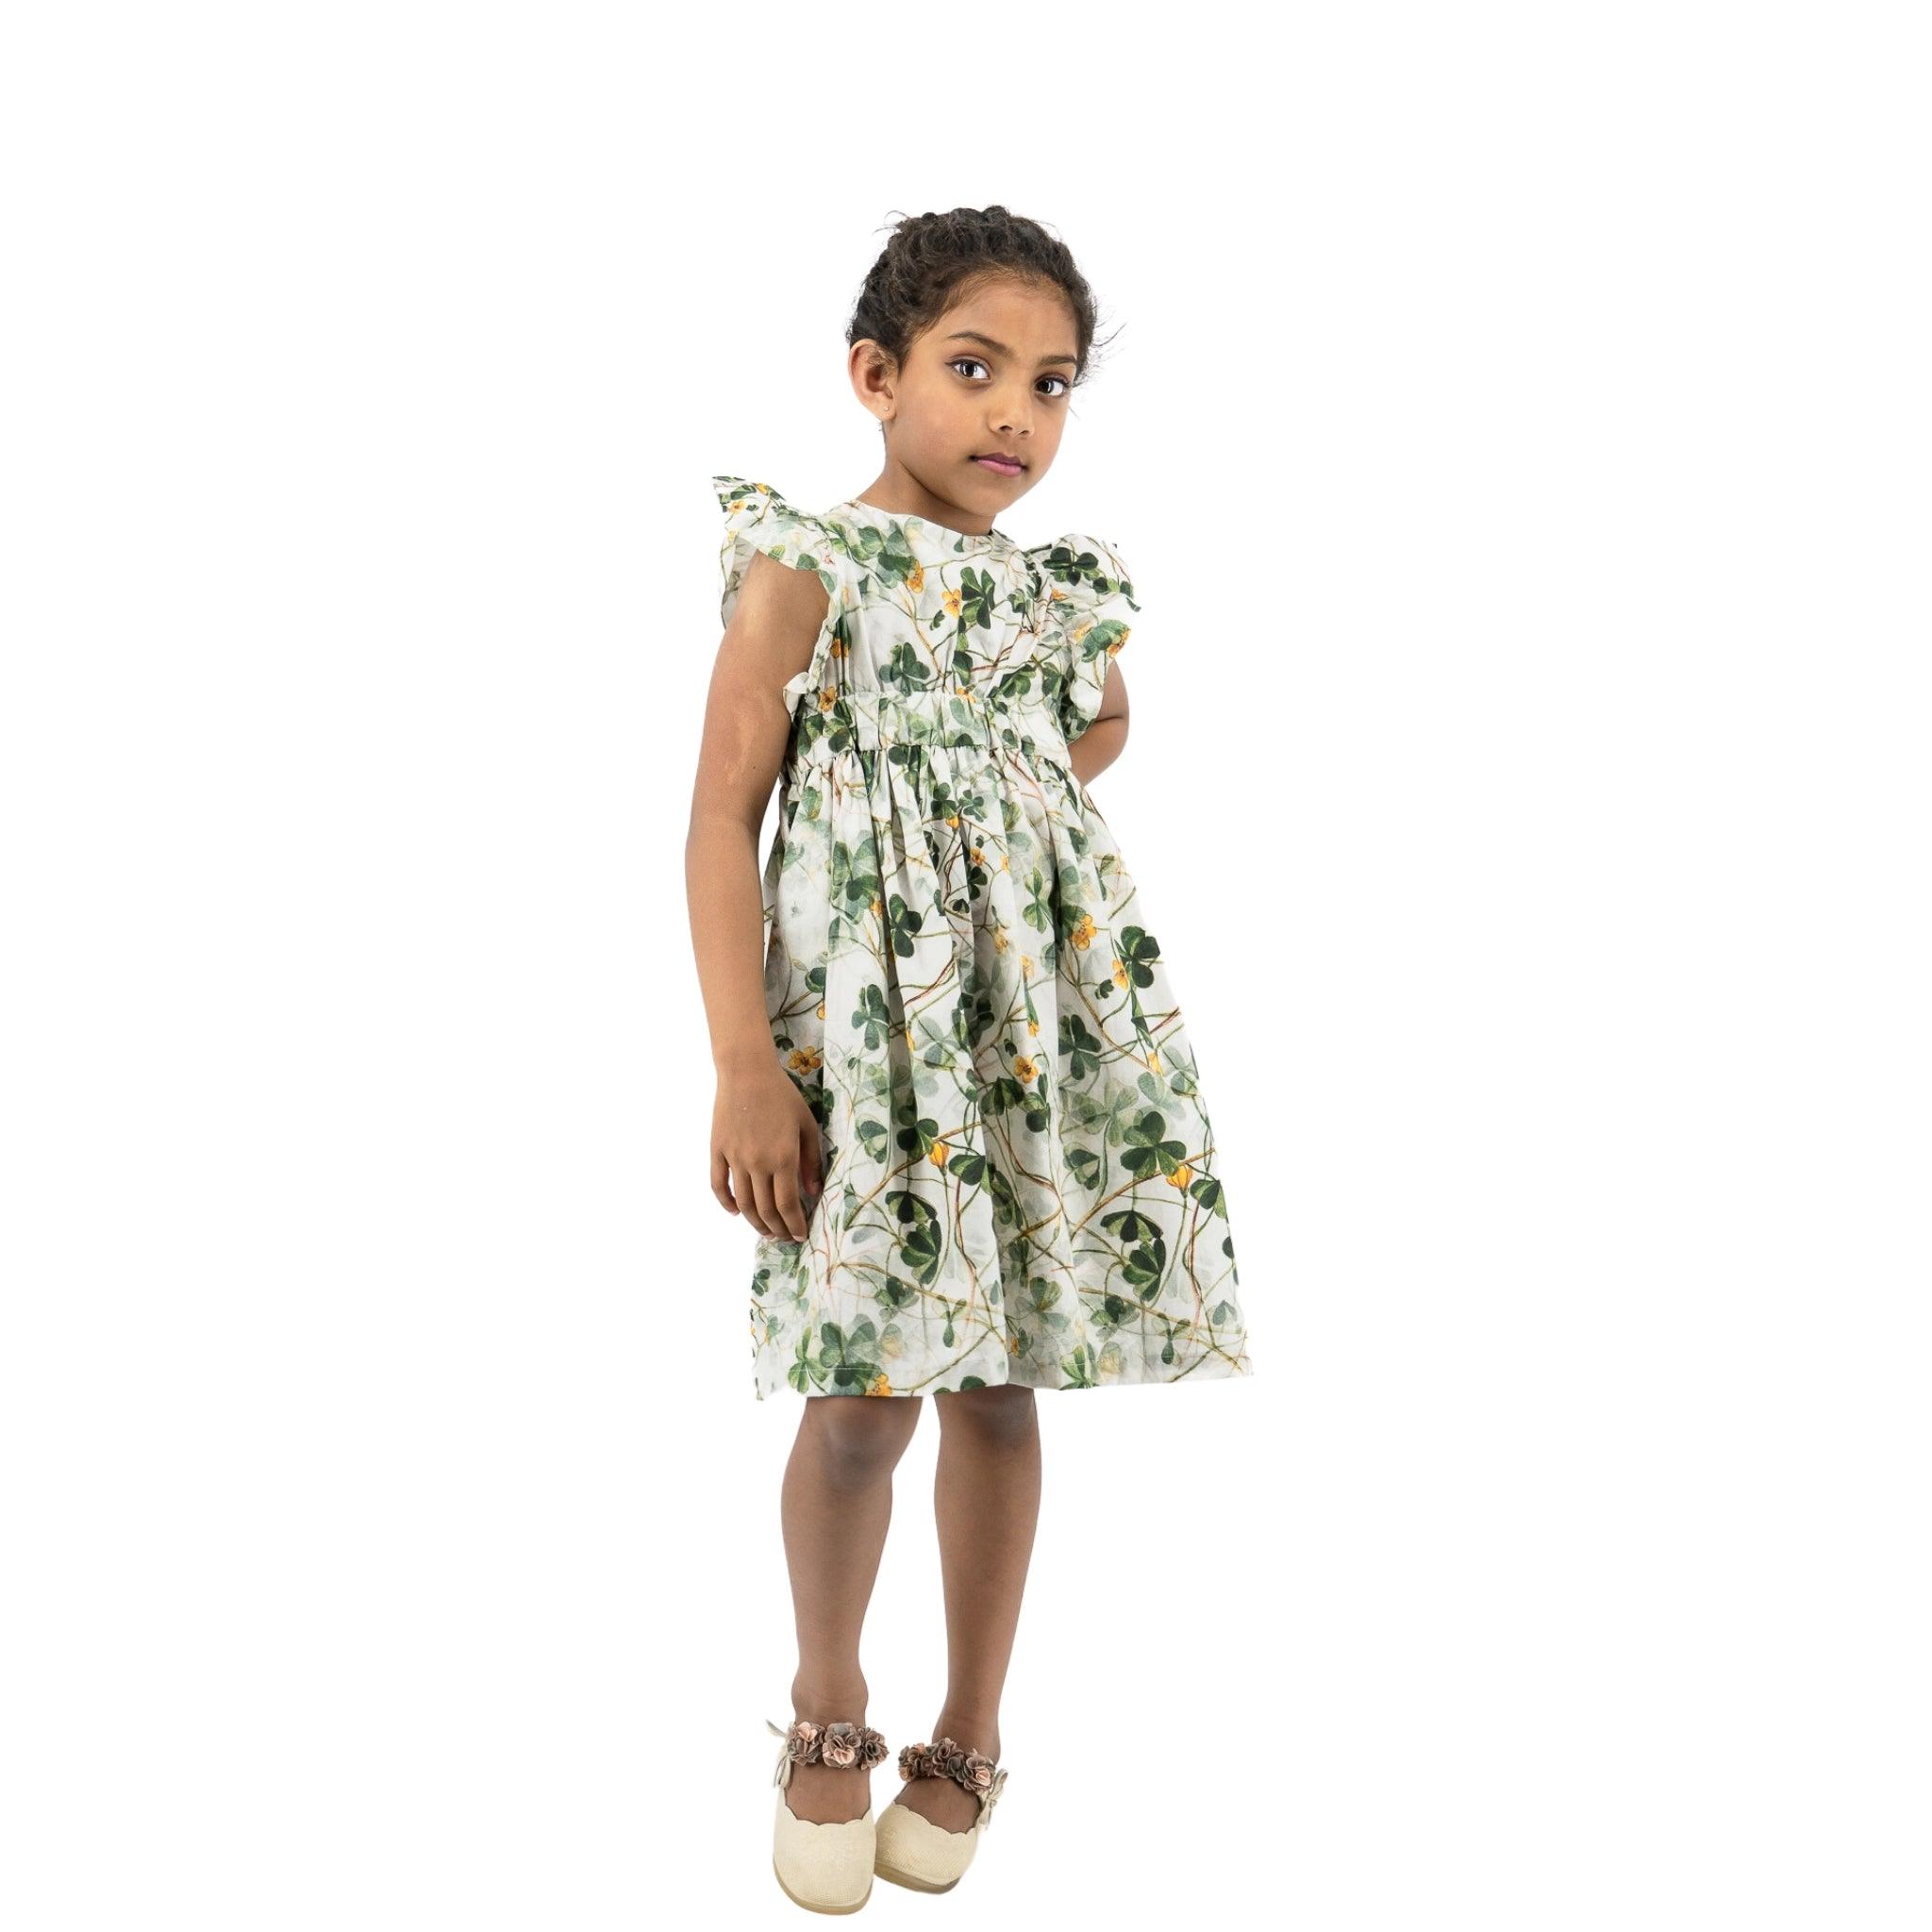 Young girl in a Karee green floral cotton dress standing isolated on a white background, looking to the side with a thoughtful expression.